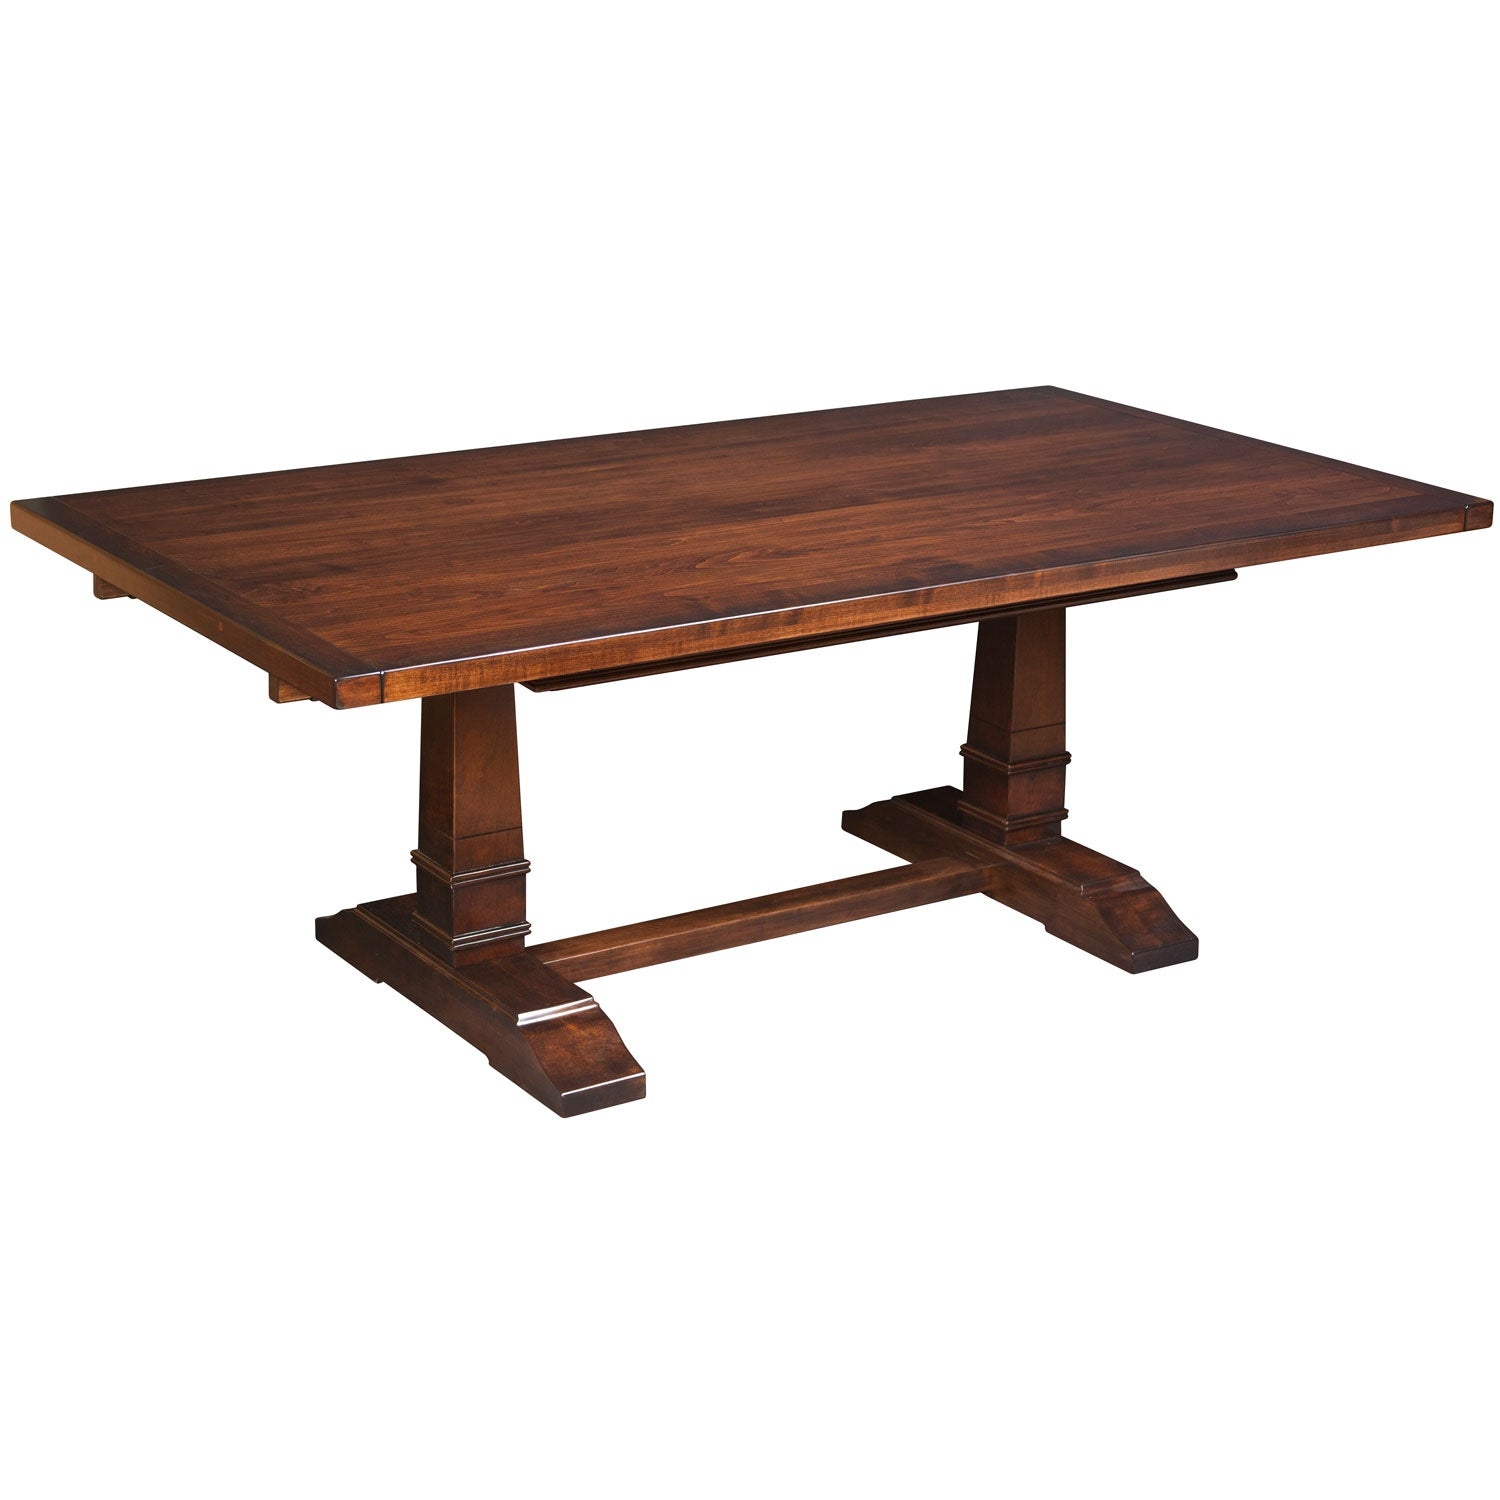 Latitude Table - snyders.furniture